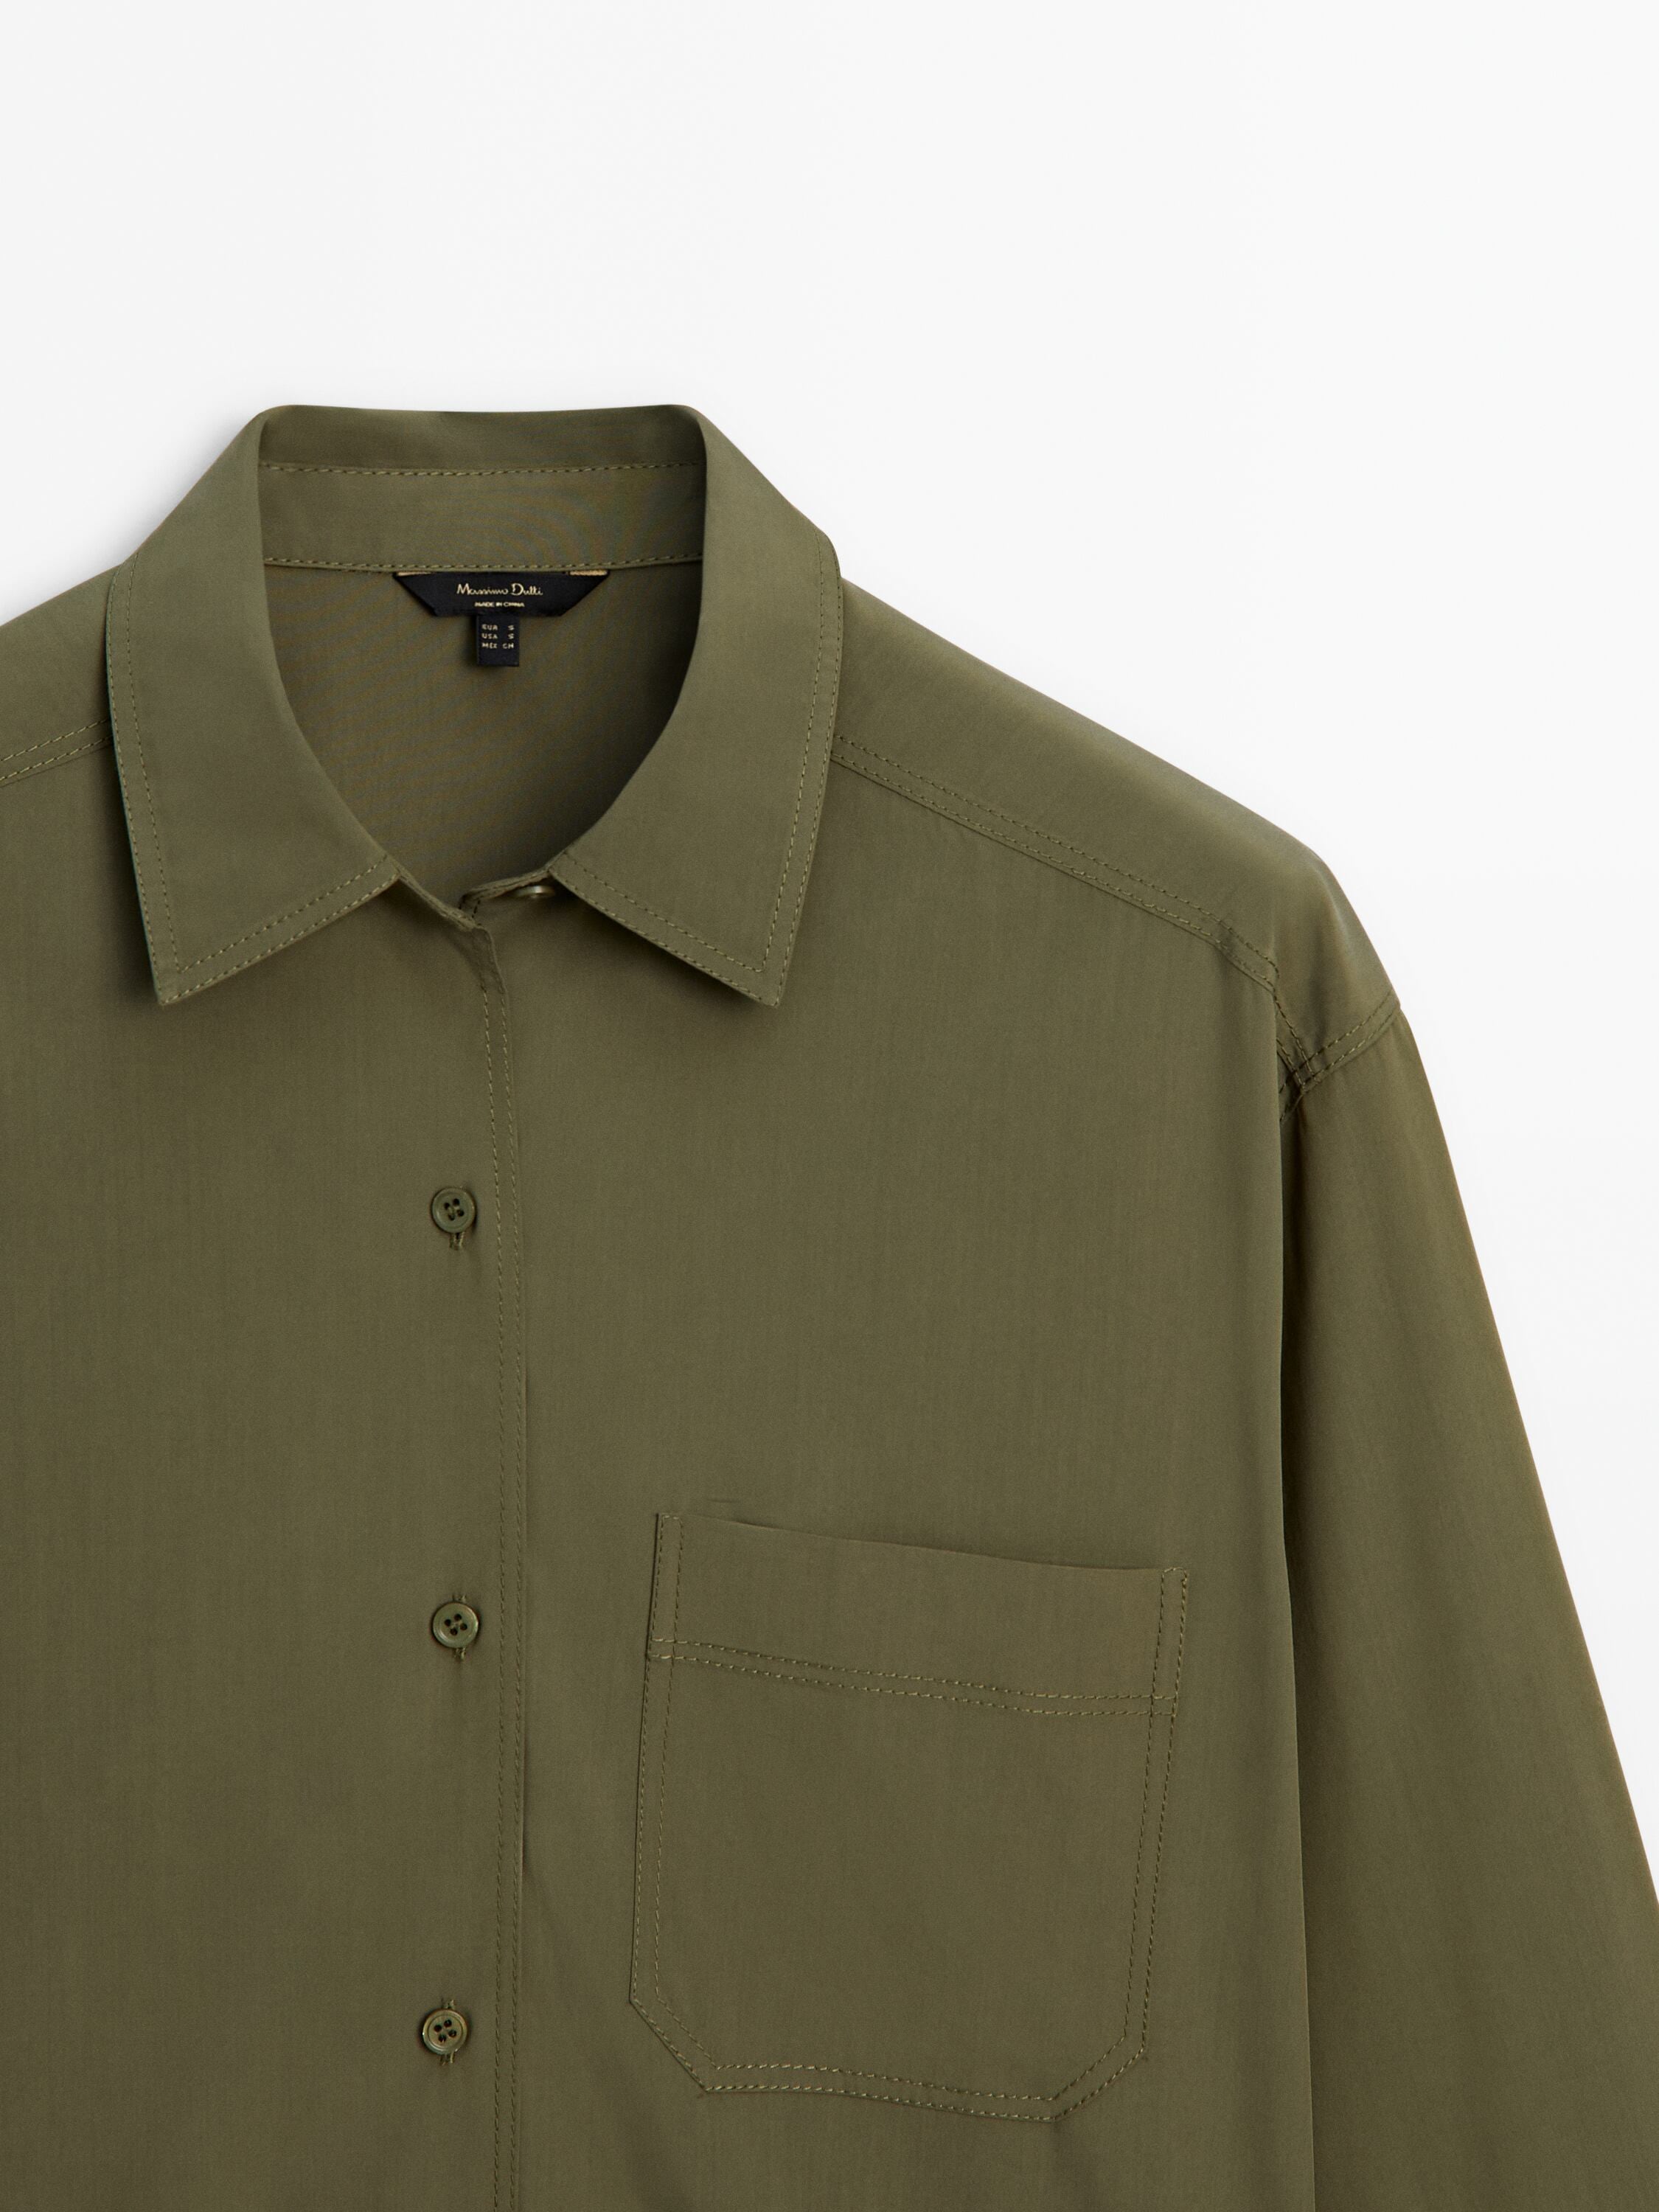 Flowing shirt with topstitching and chest pocket